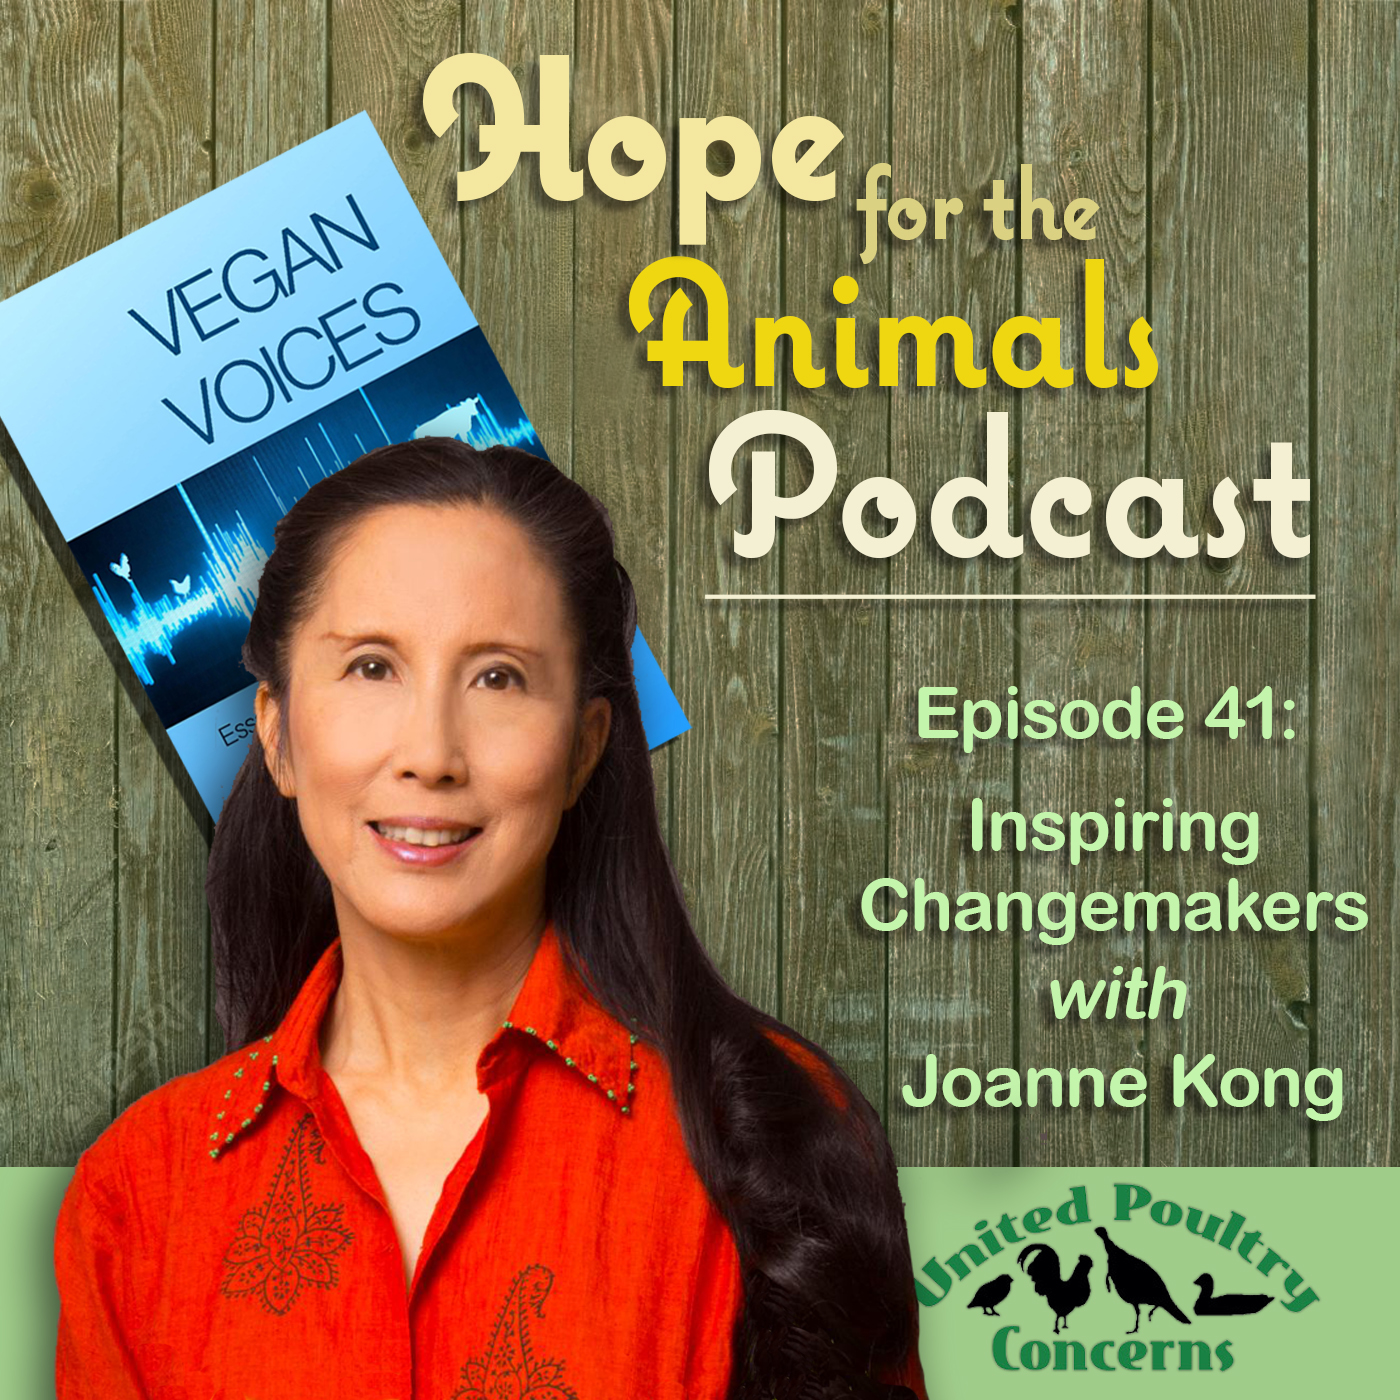 Episode 41: Inspiring Changemakers with Joanne Kong